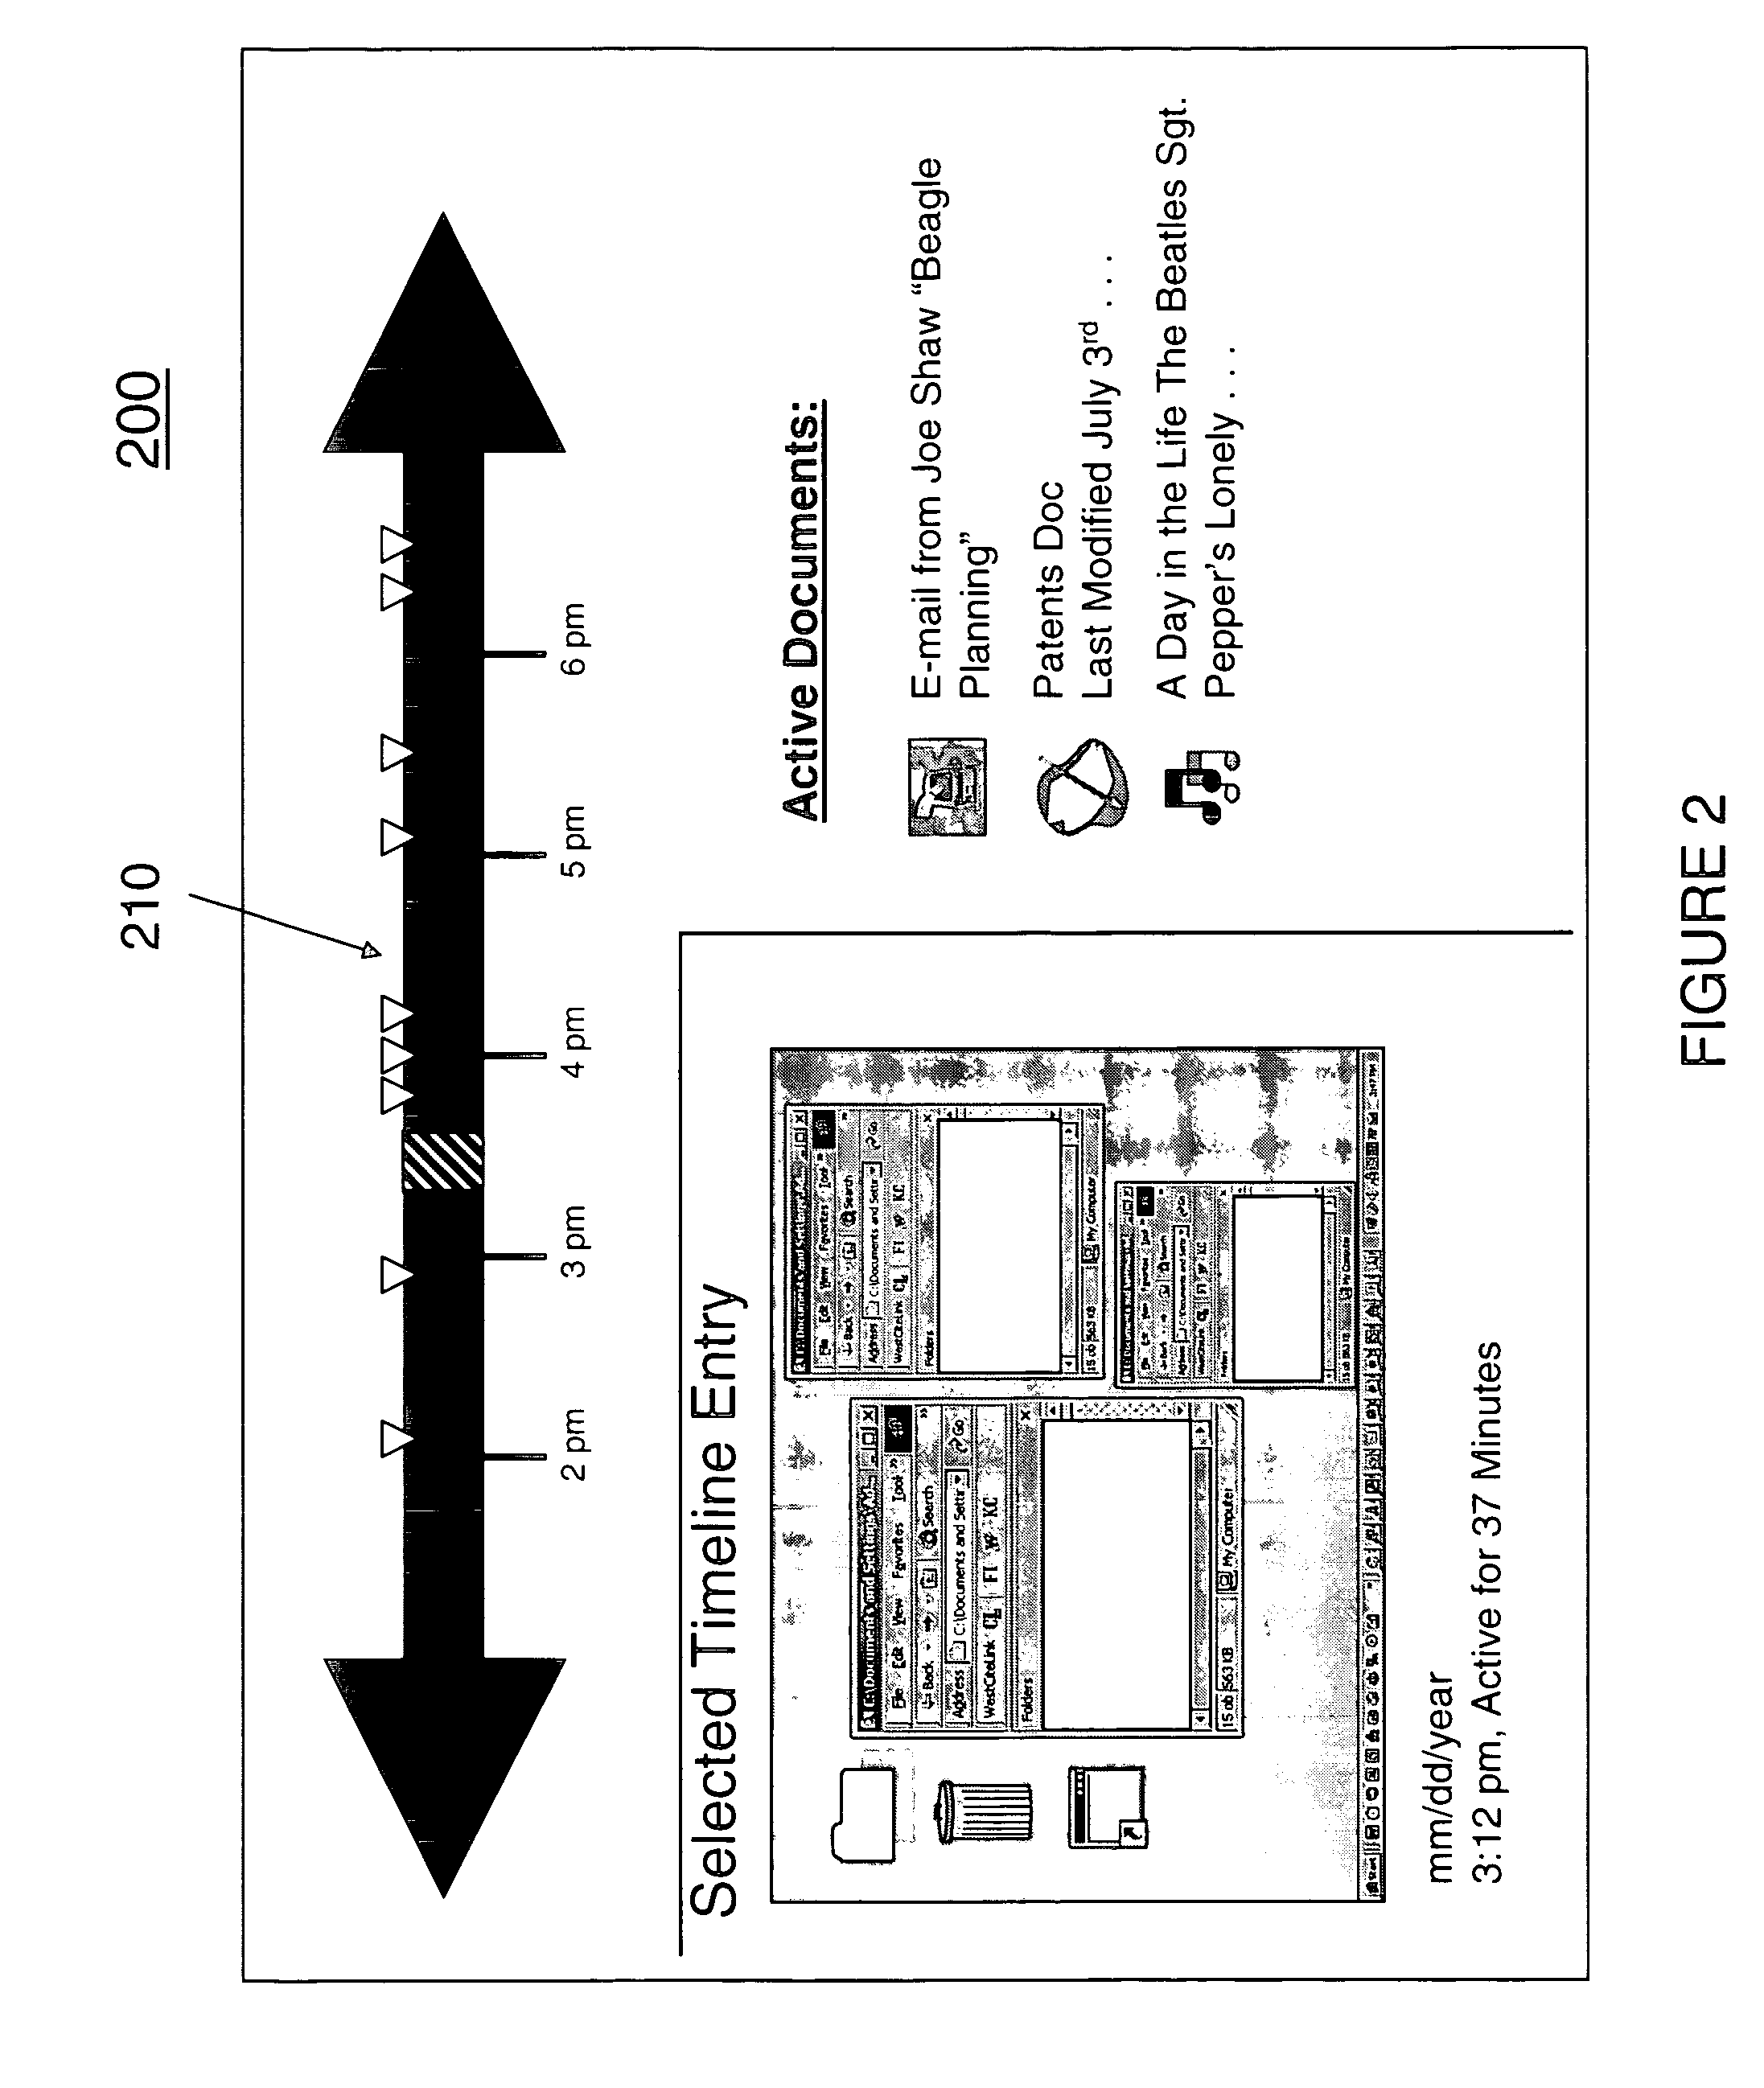 System and method of searching for providing dynamic search results with temporary visual display